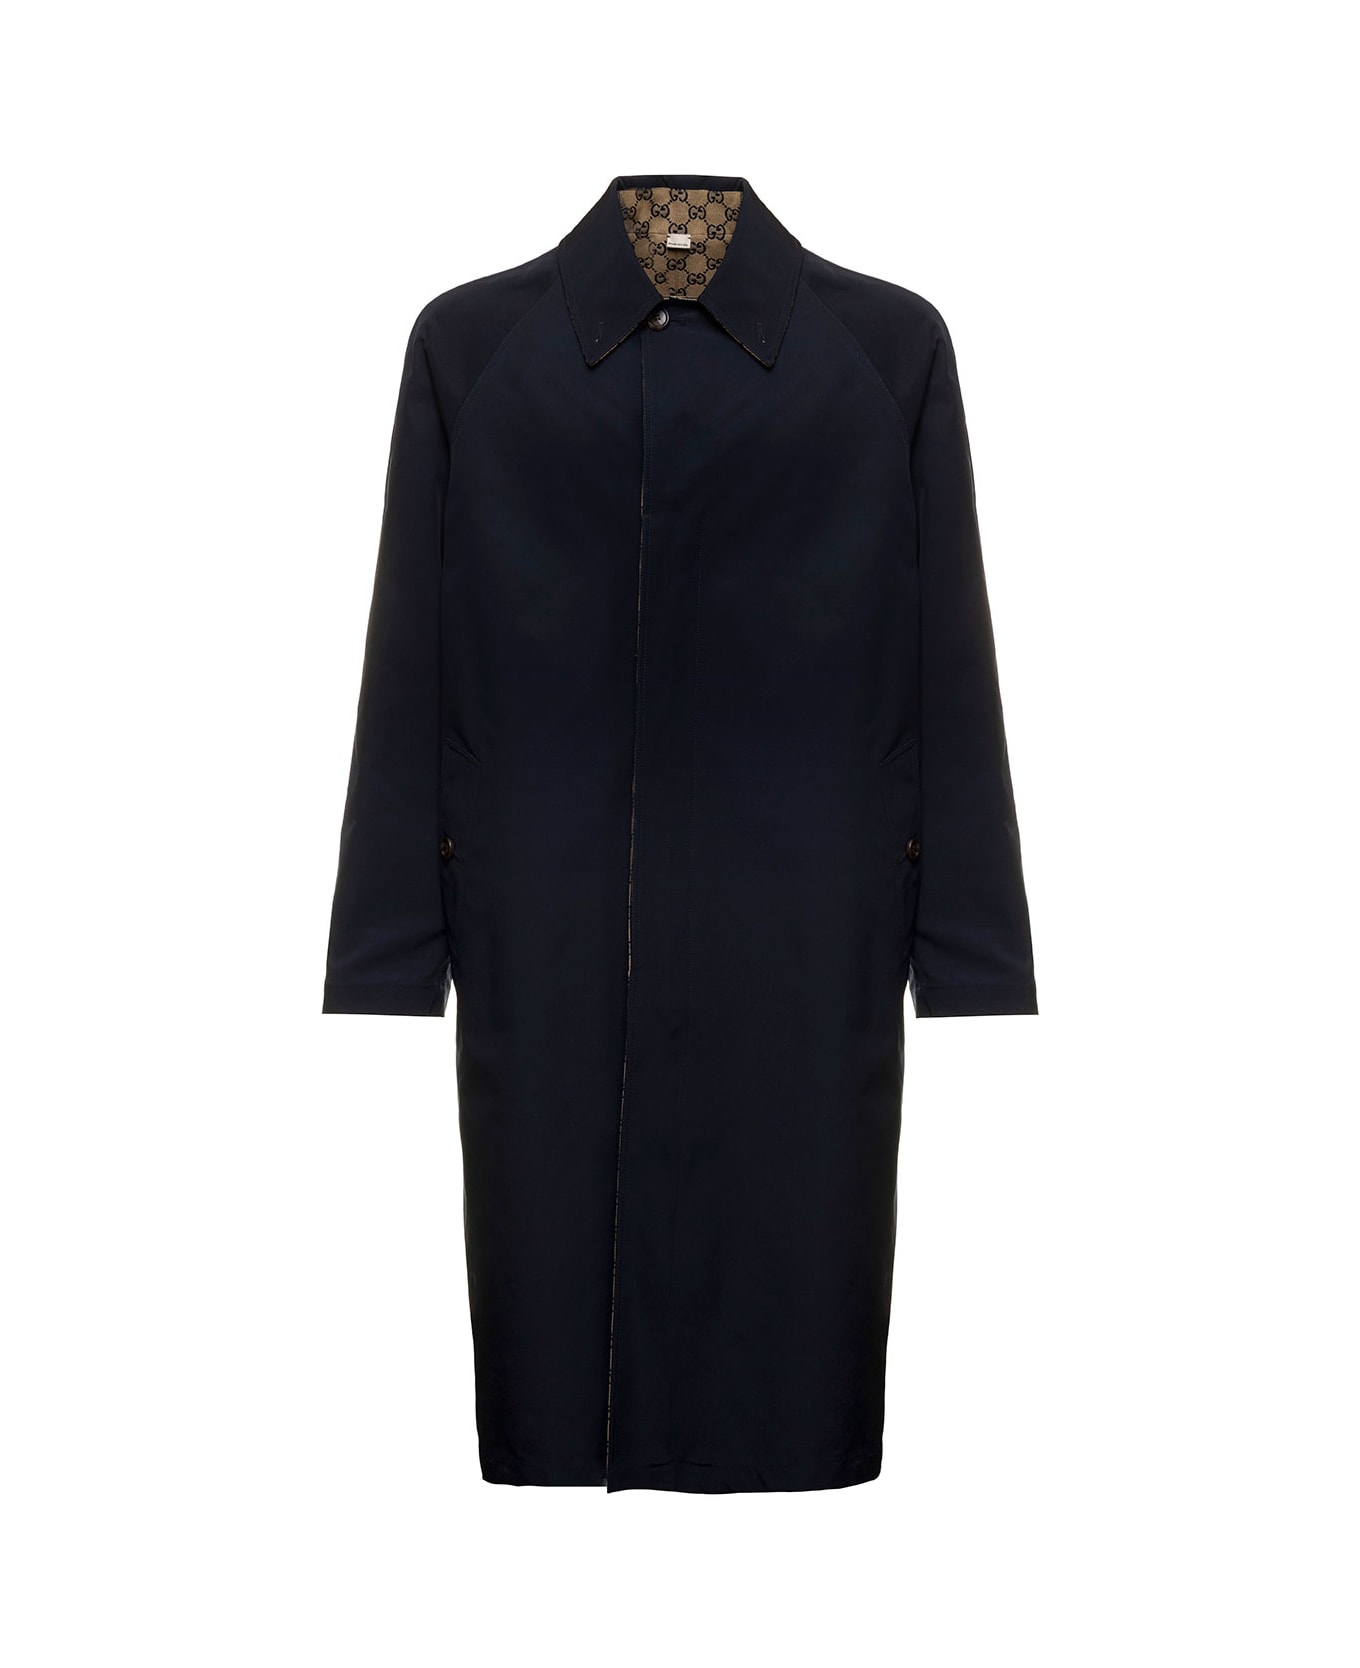 Gucci Blue Reversible Coat In Gg Supreme And Tech Canvas Gucci Man - Blue